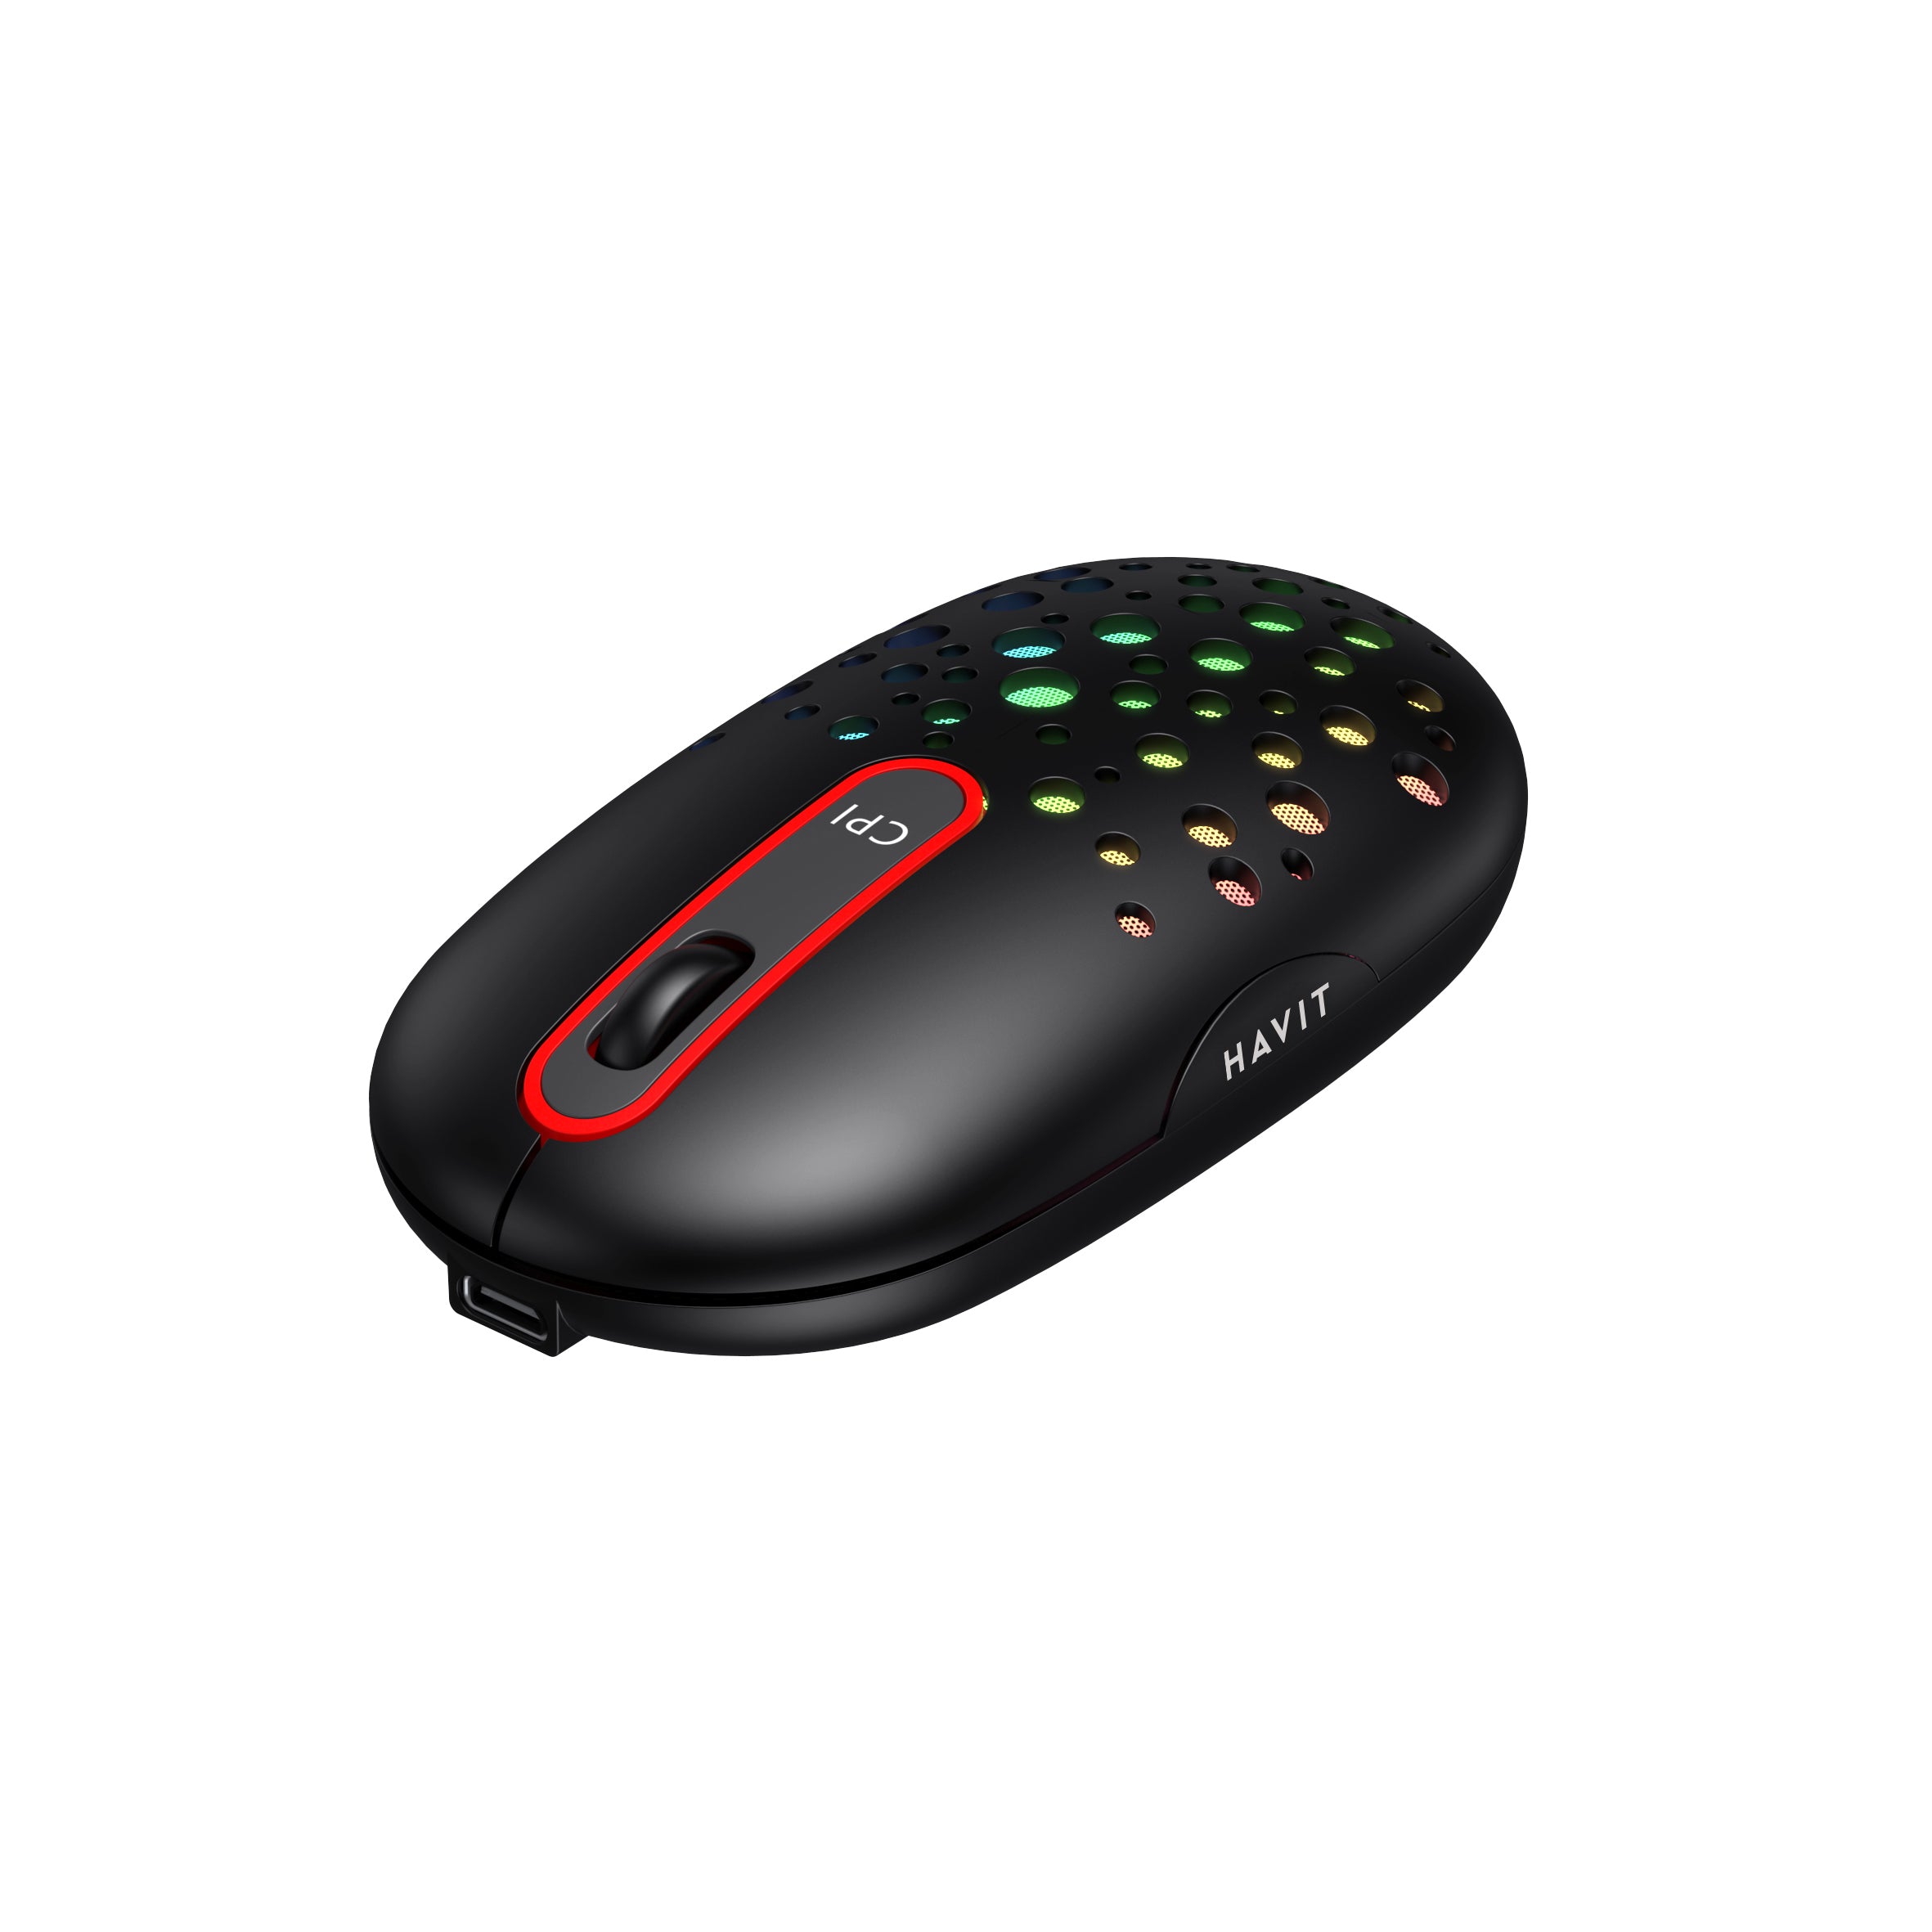 HAVIT MS64GT 2.4G Portable USB Wireless Mouse for Windows Mac PC Notebook